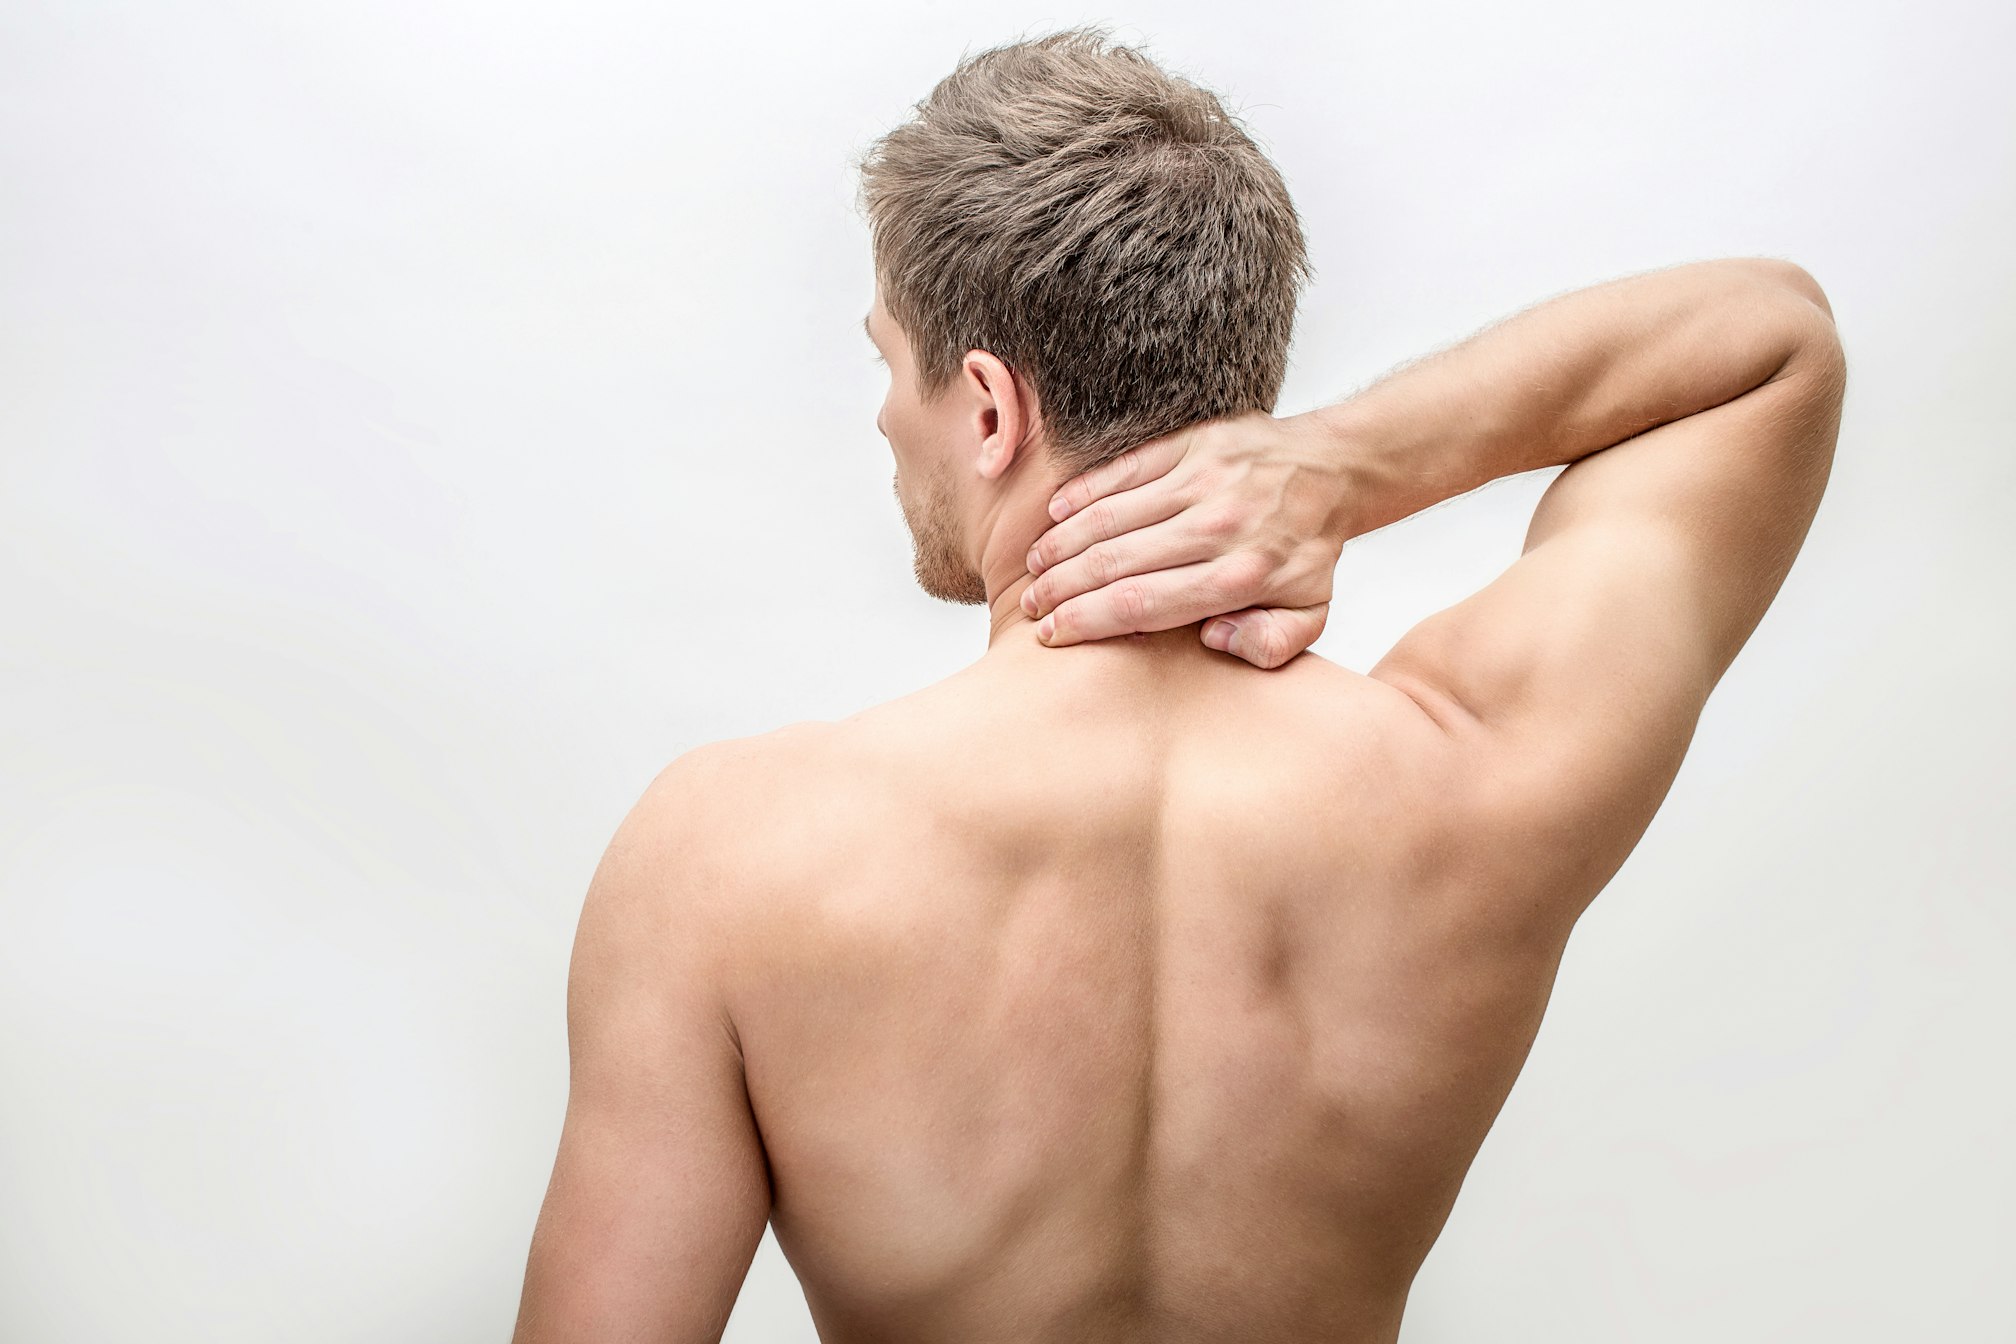 Losing Back Flab as a Man: Exercises, Diet, and More